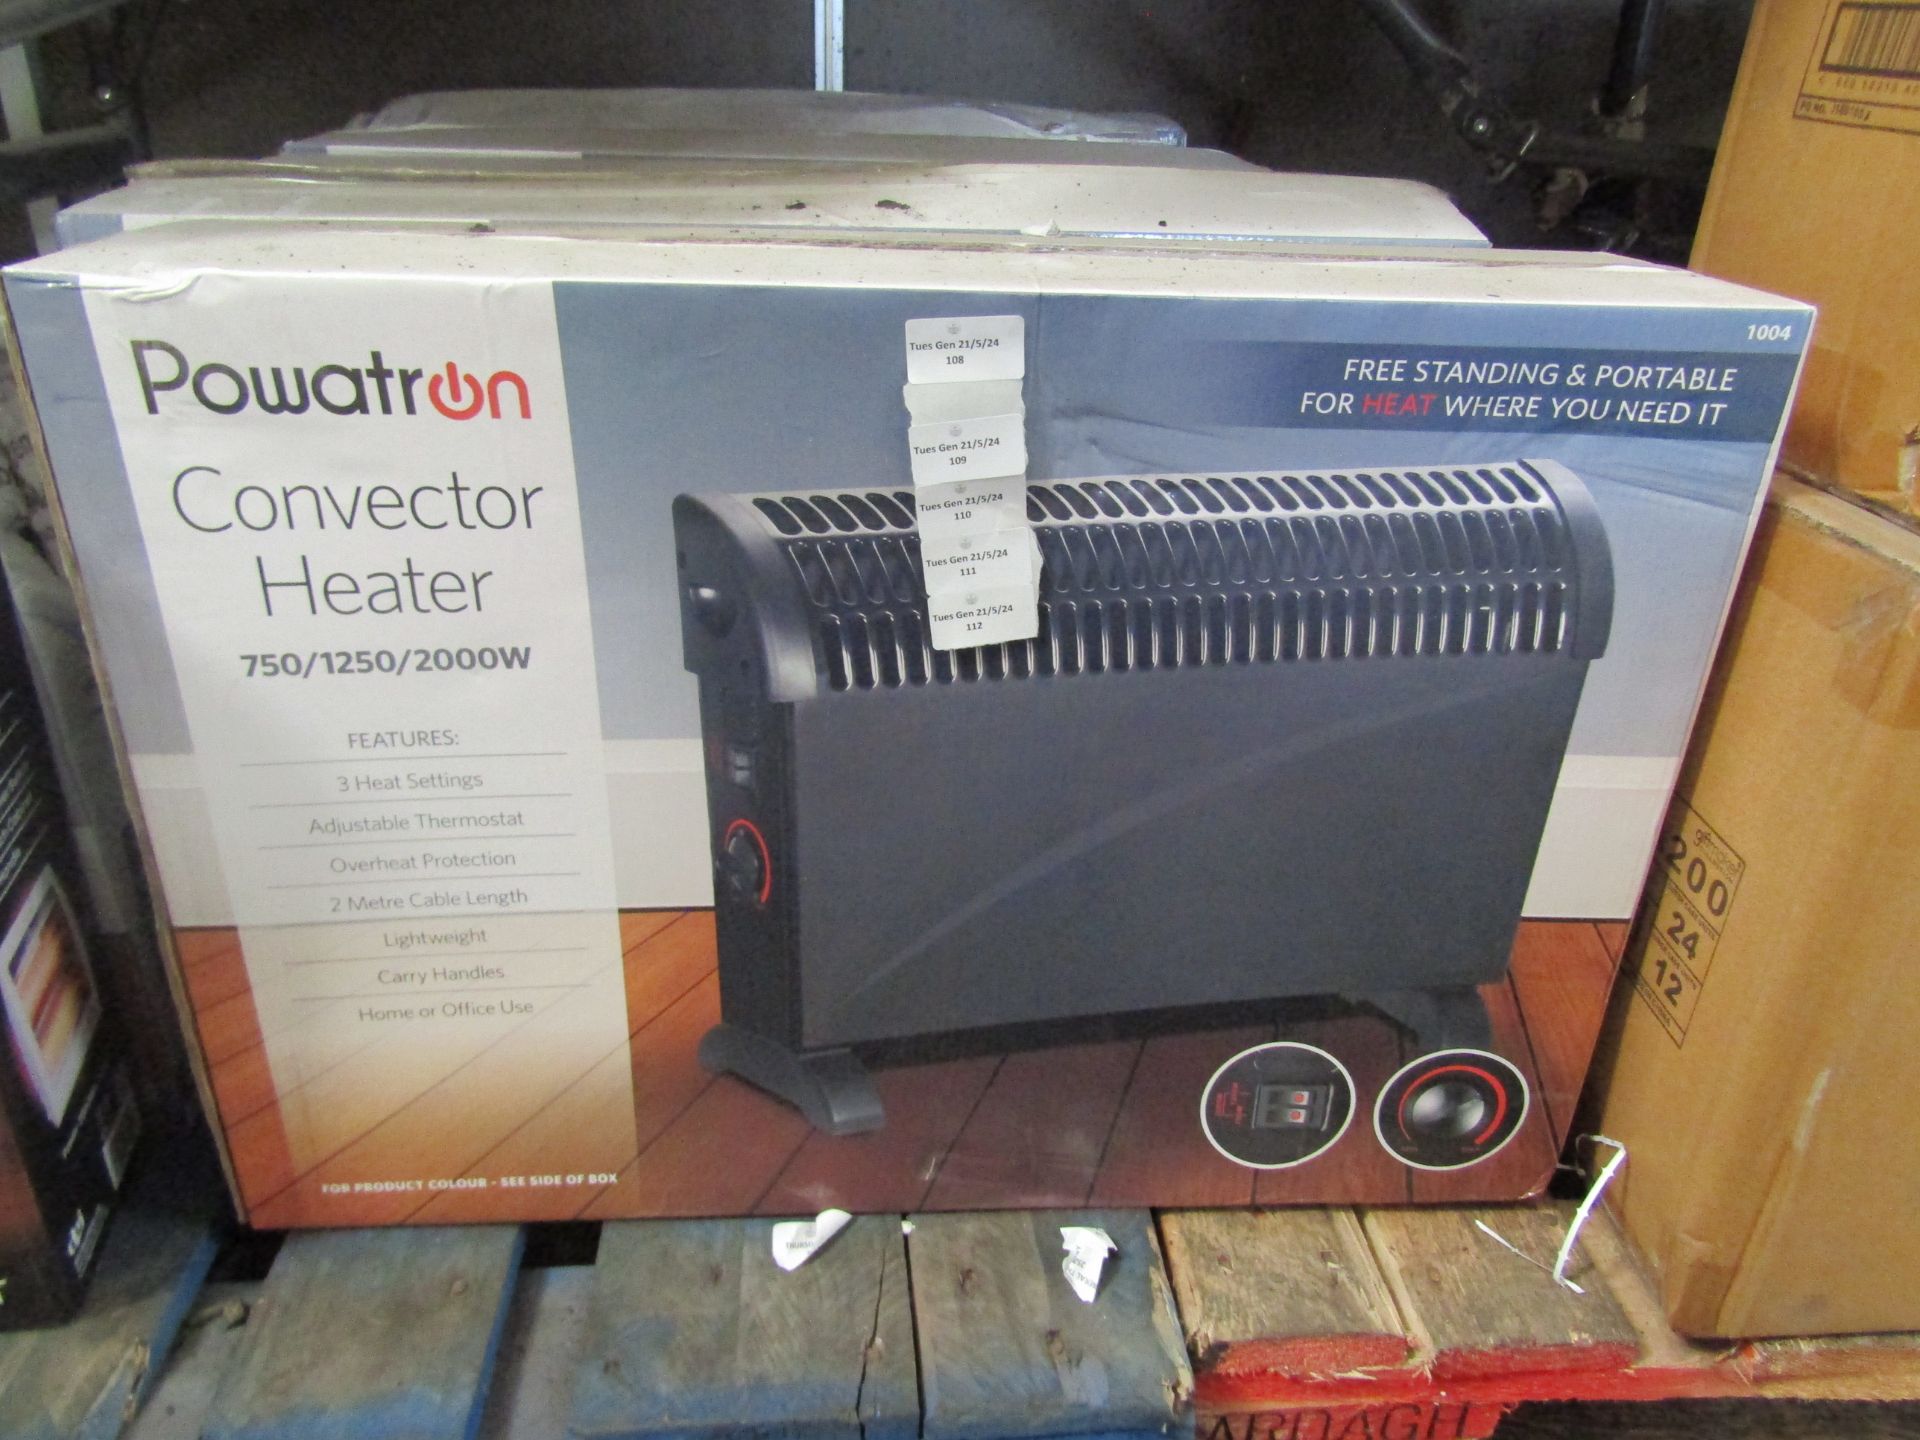 Powatron - Electric Convector Heater 2000w - Untested & Boxed.